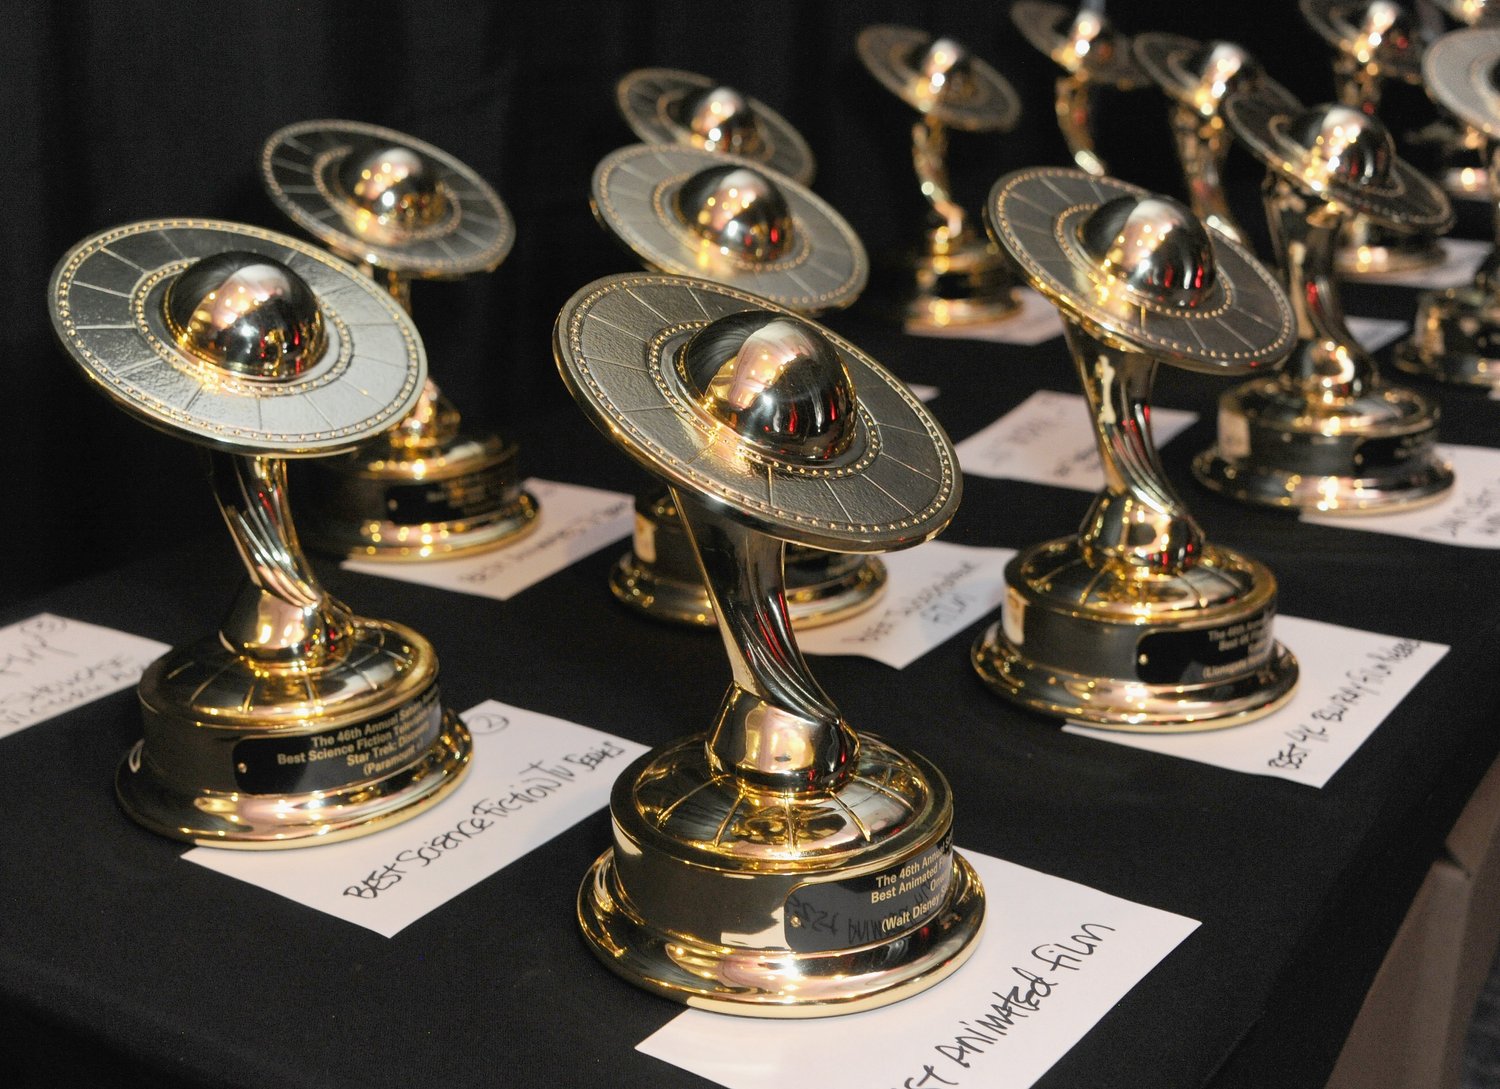 The 51st Annual Saturn Awards